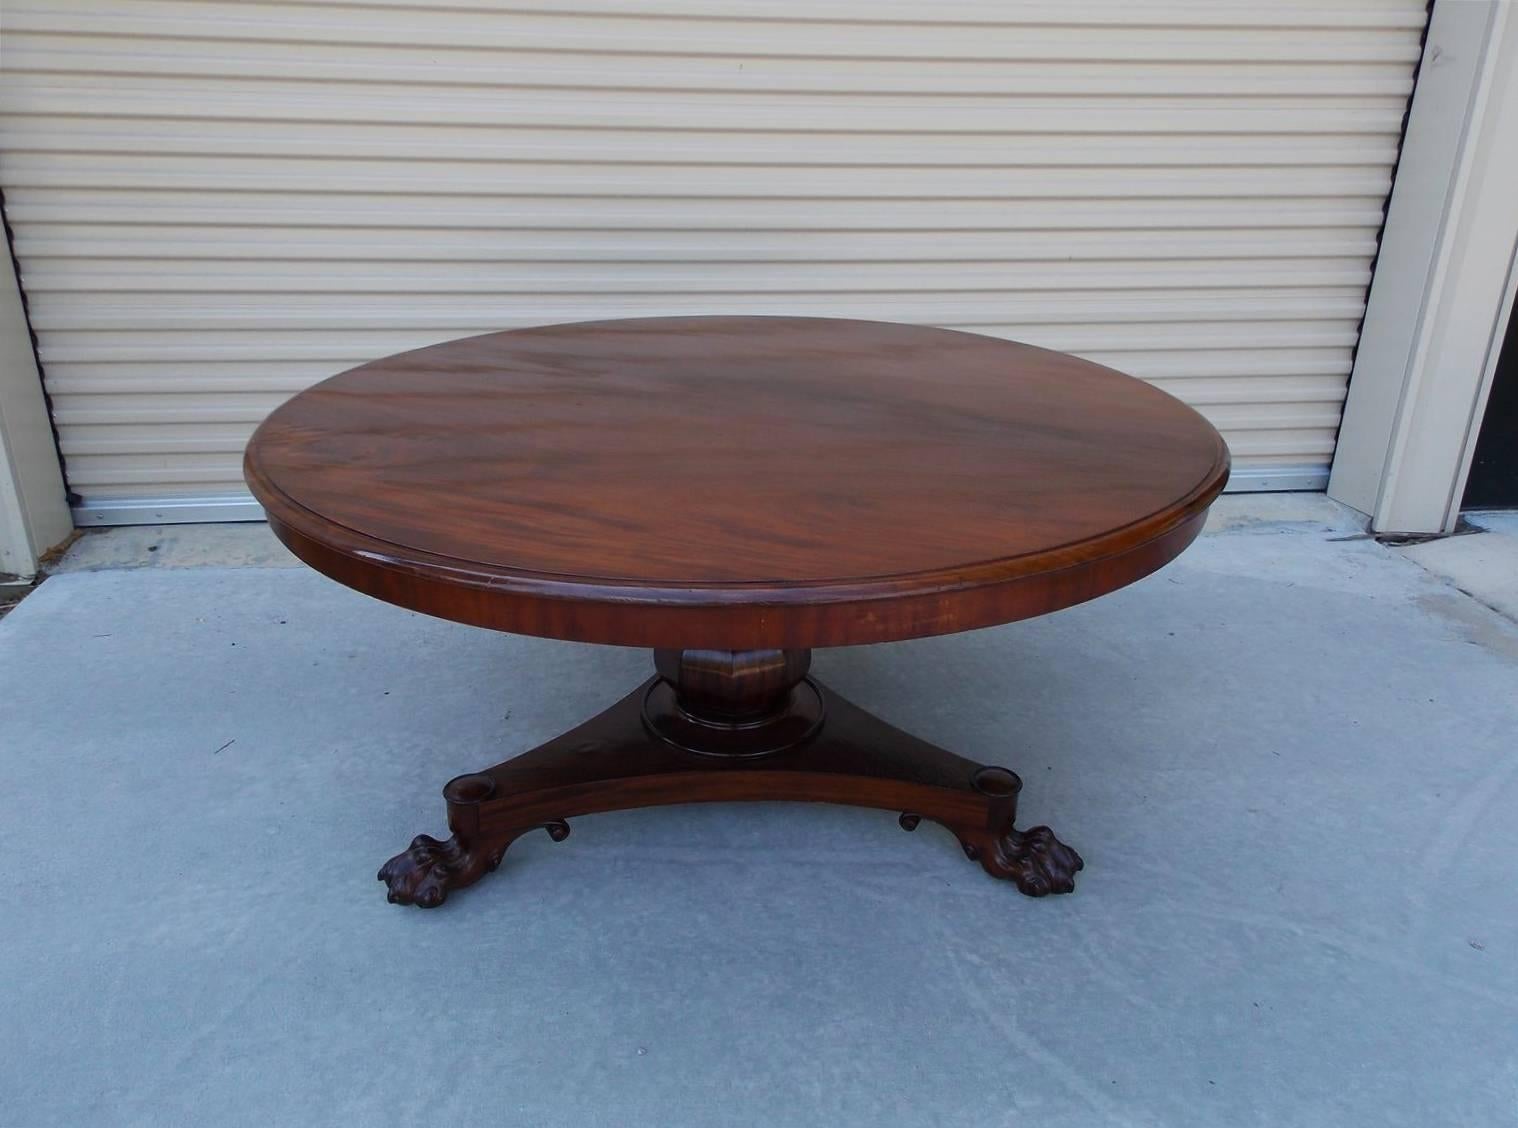 Hand-Carved English Regency Mahogany Tilt-Top Center Table with Paw Feet, Circa 1815 For Sale